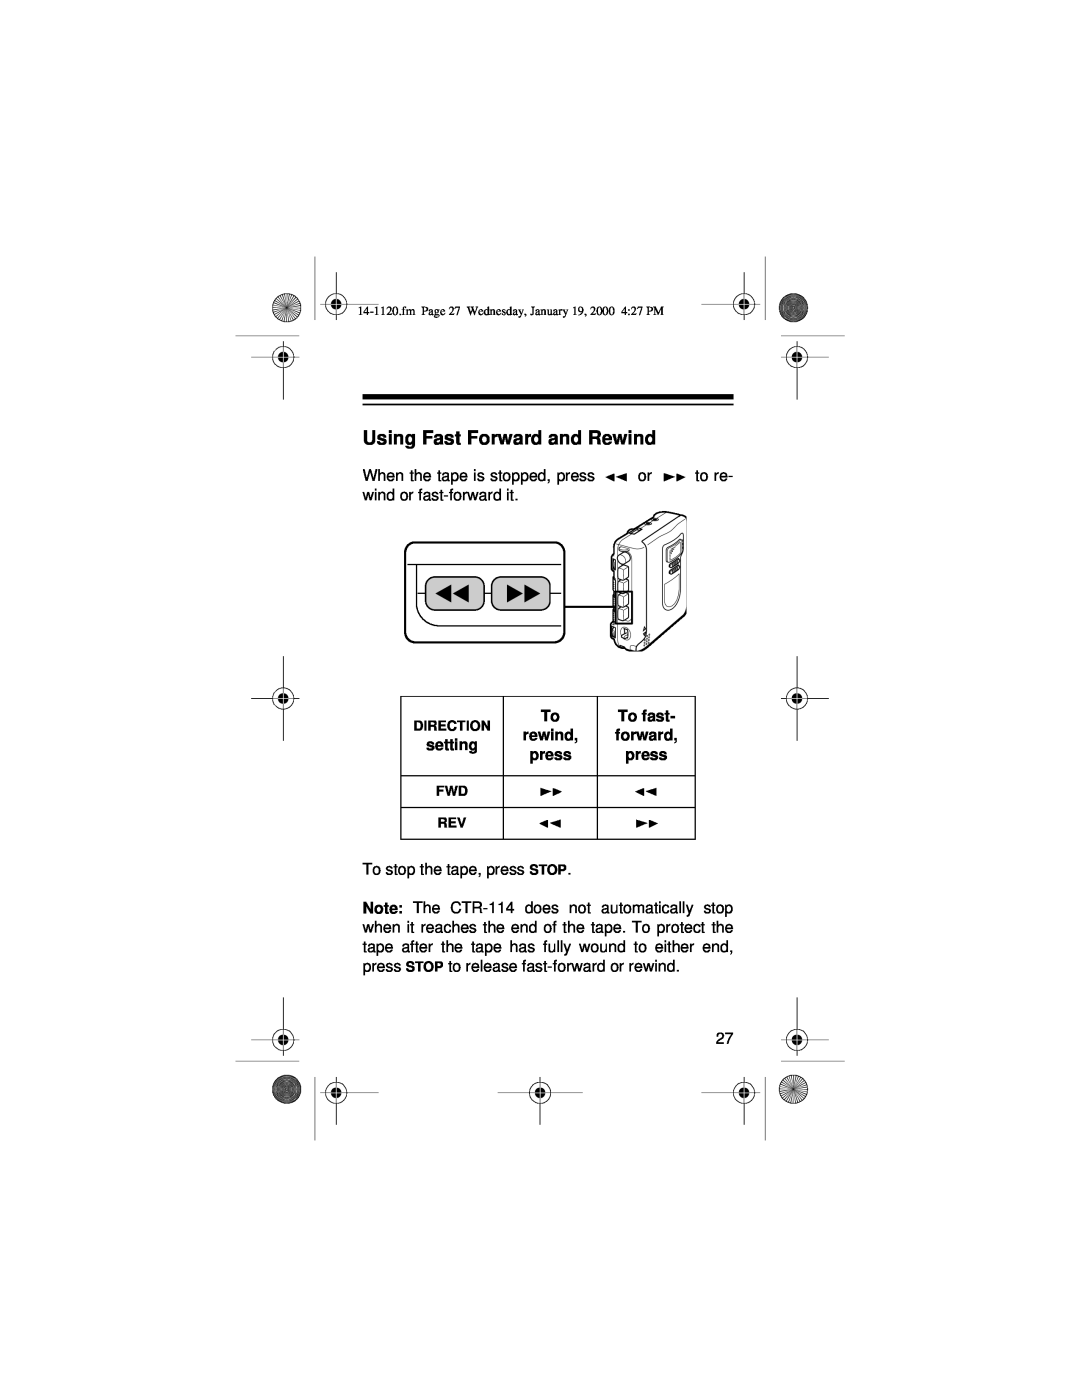 Panasonic CTR-114 owner manual Using Fast Forward and Rewind, setting, To rewind press 